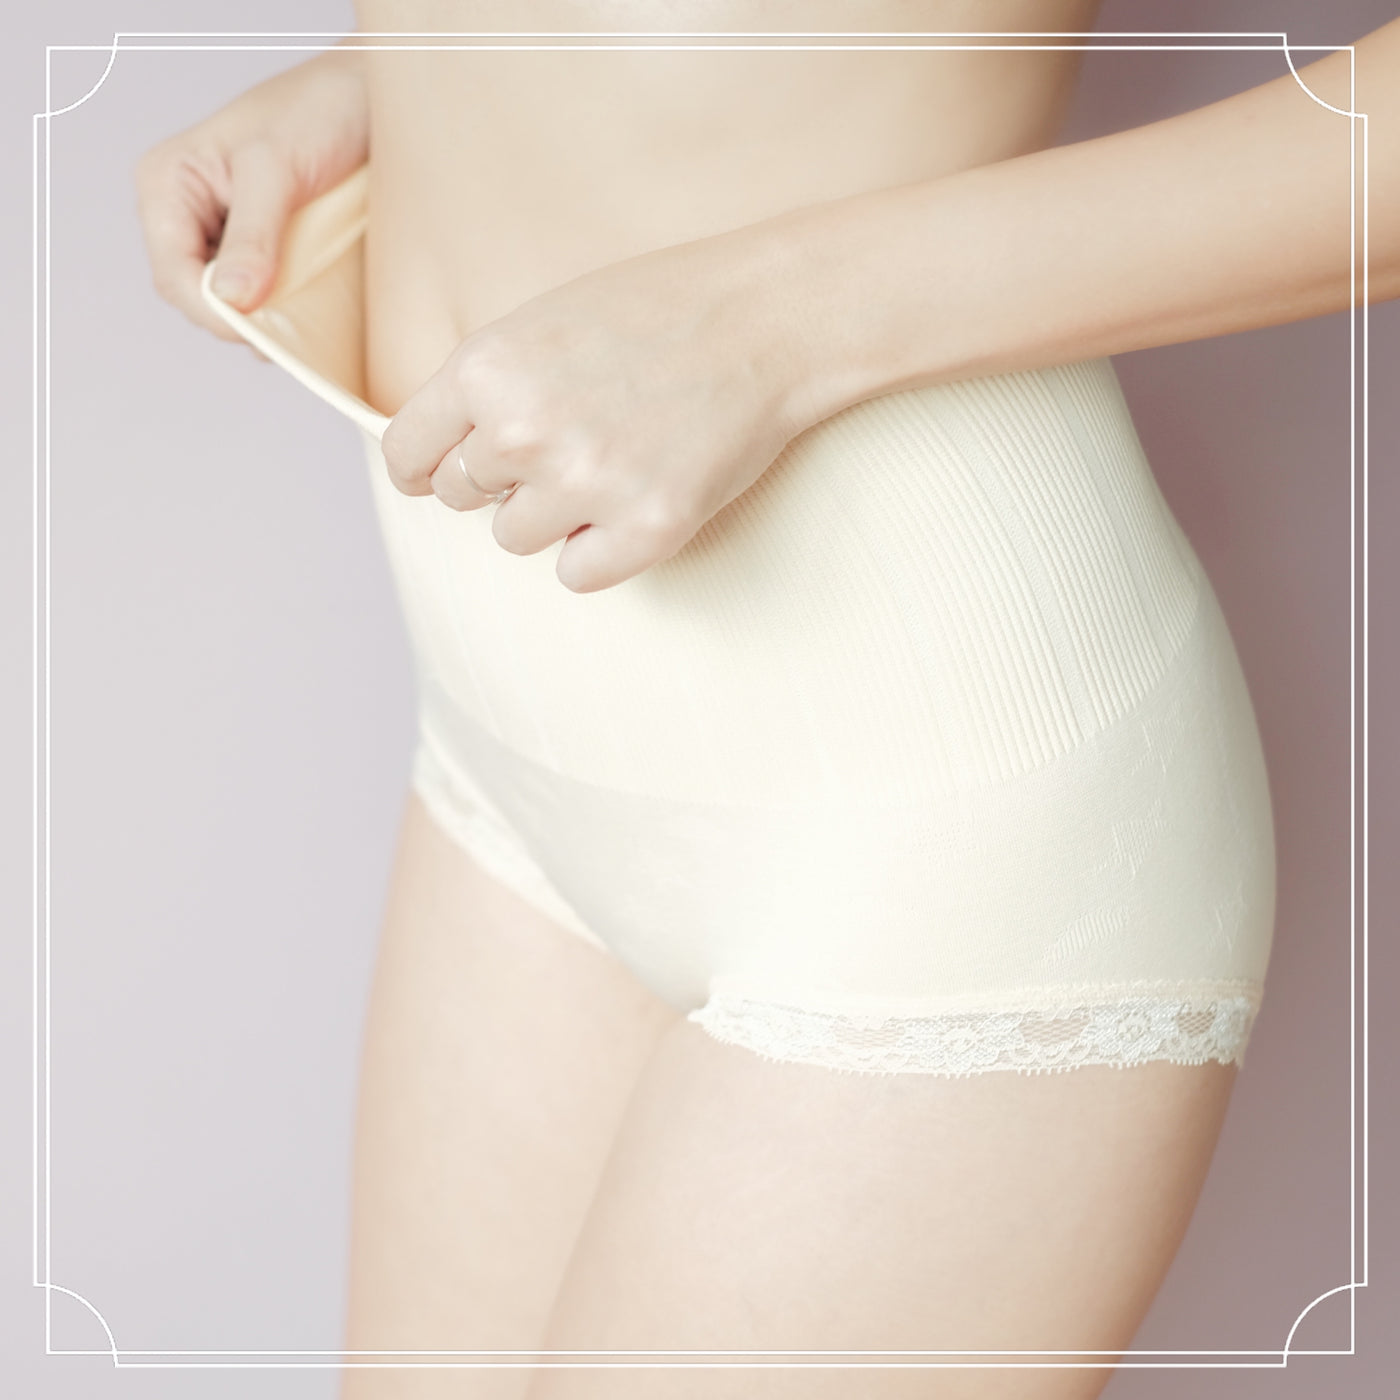 Mainichi-Shapewear - The most comfortable shape wear that you'll ever find  that actually does the job. You've got to try it for yourself! . . .  #mainichiwear #lingeries #lingeriesensual #alldayeveryday #panties # shapewear #